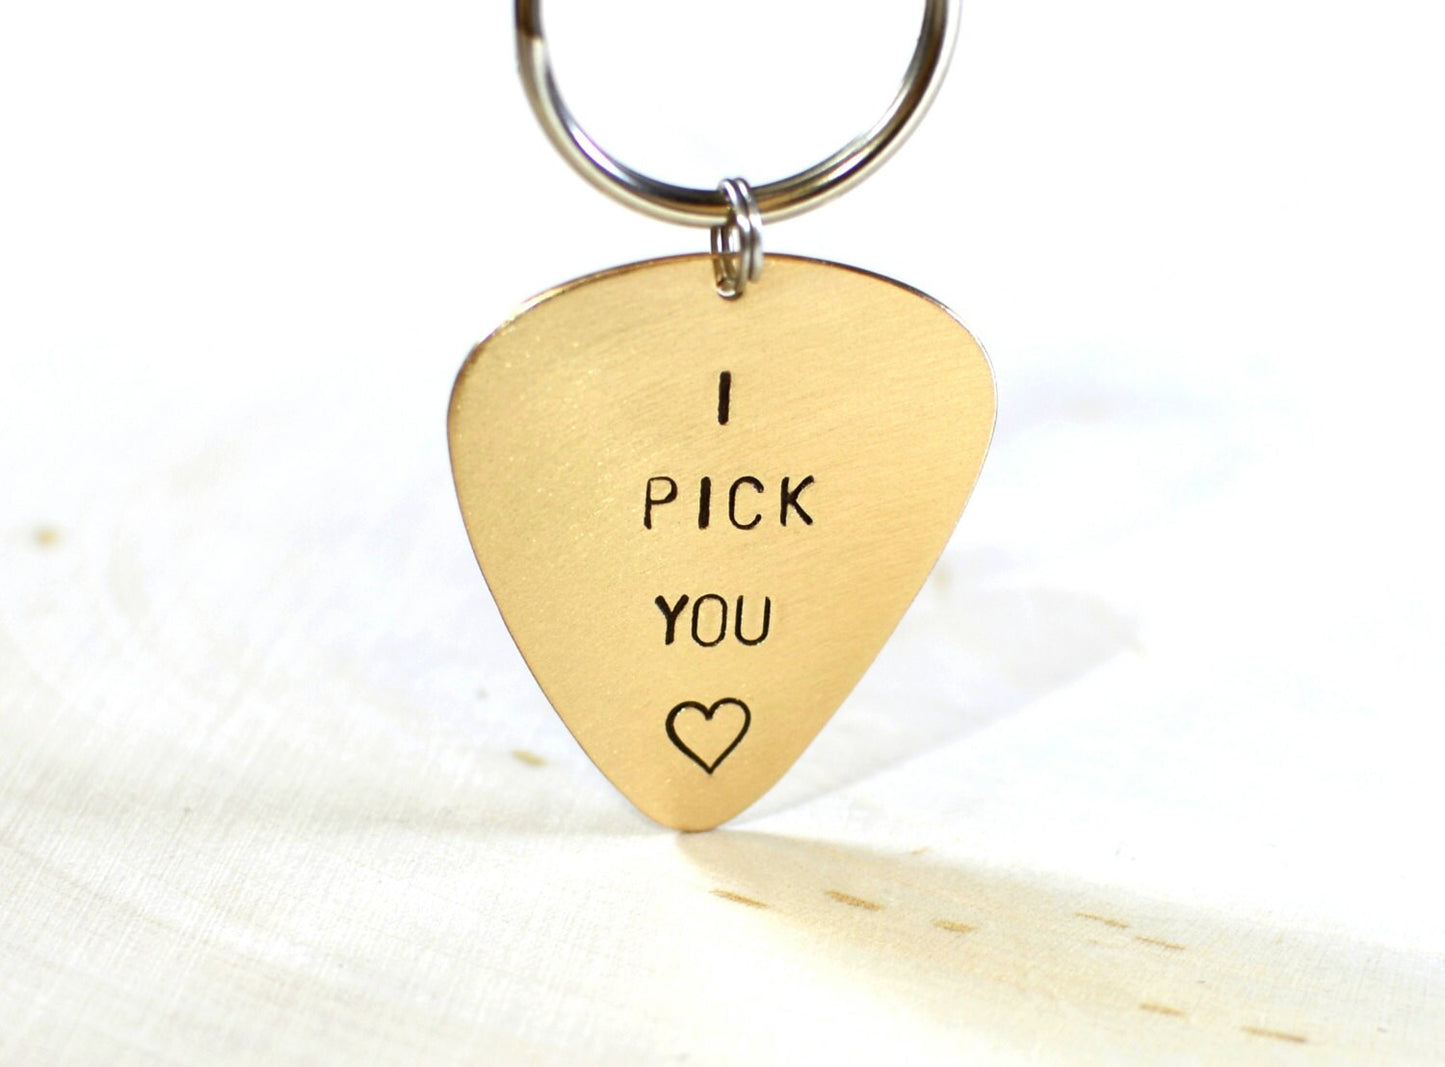 Bronze guitar pick keychain stamped with I PICK YOU